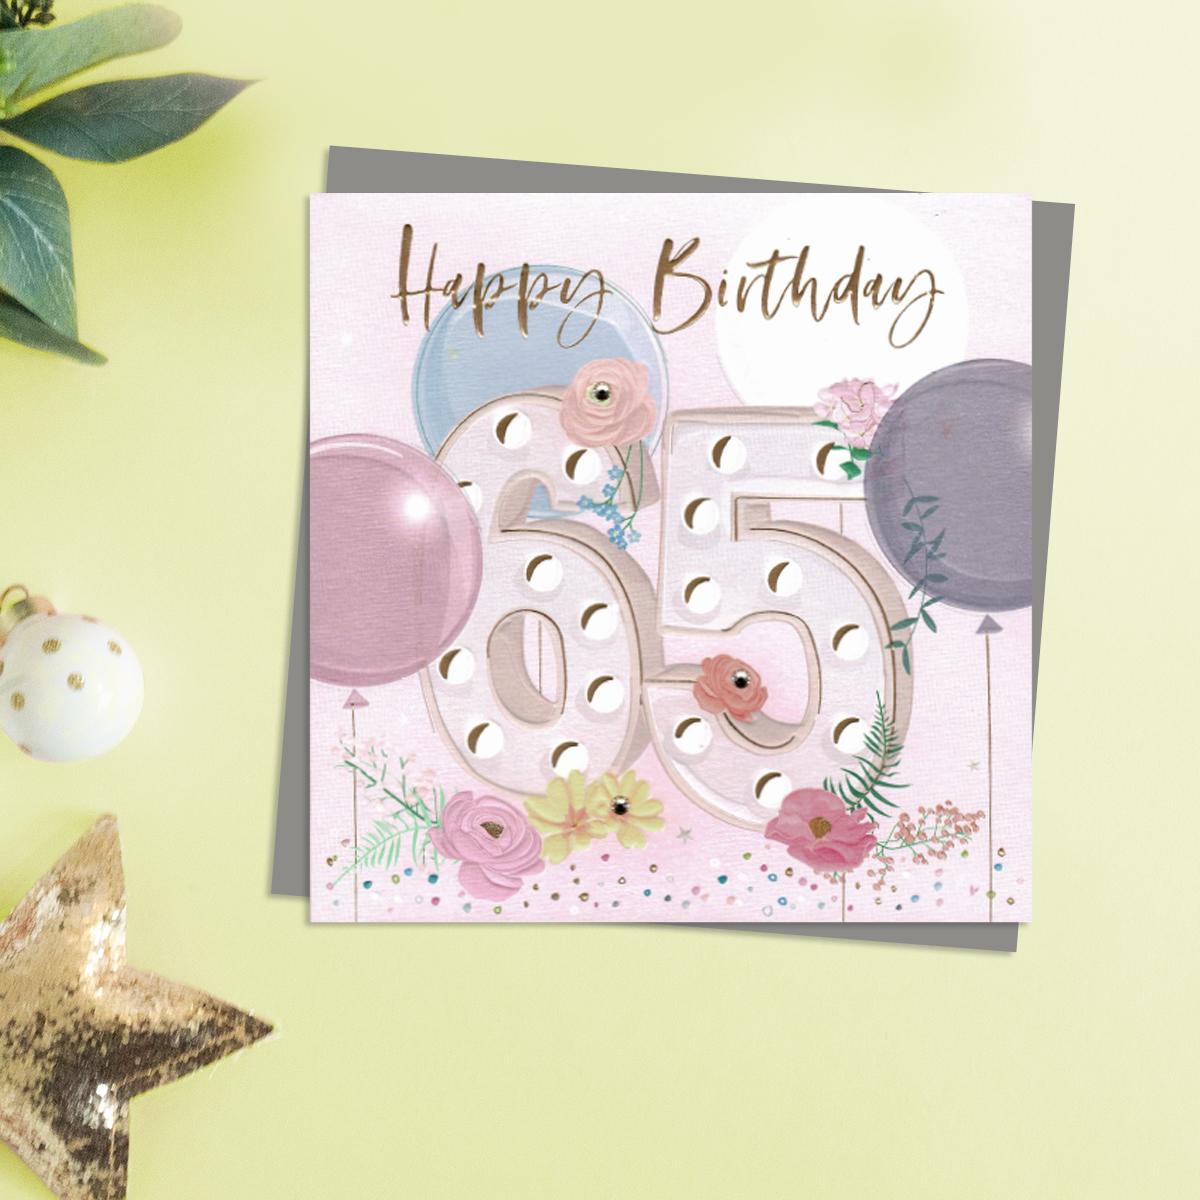 Happy 65th Birthday Design Featuring Embellished Flowers and Balloons. Completed With Gold Foil Lettering and A Co-Ordinating Envelope